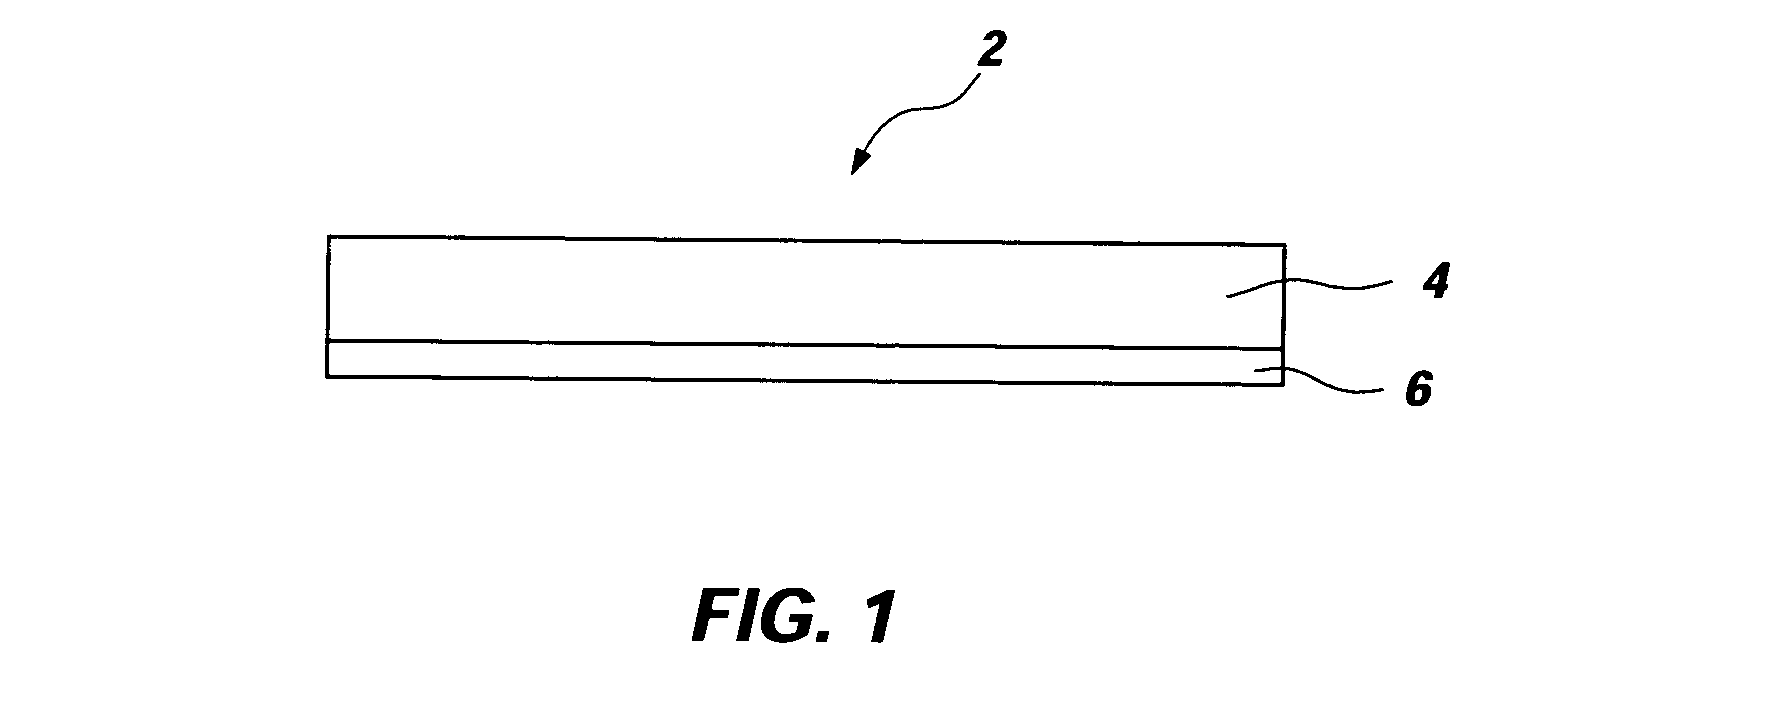 Inkjet recording materials containing siloxane copolymer surfactants